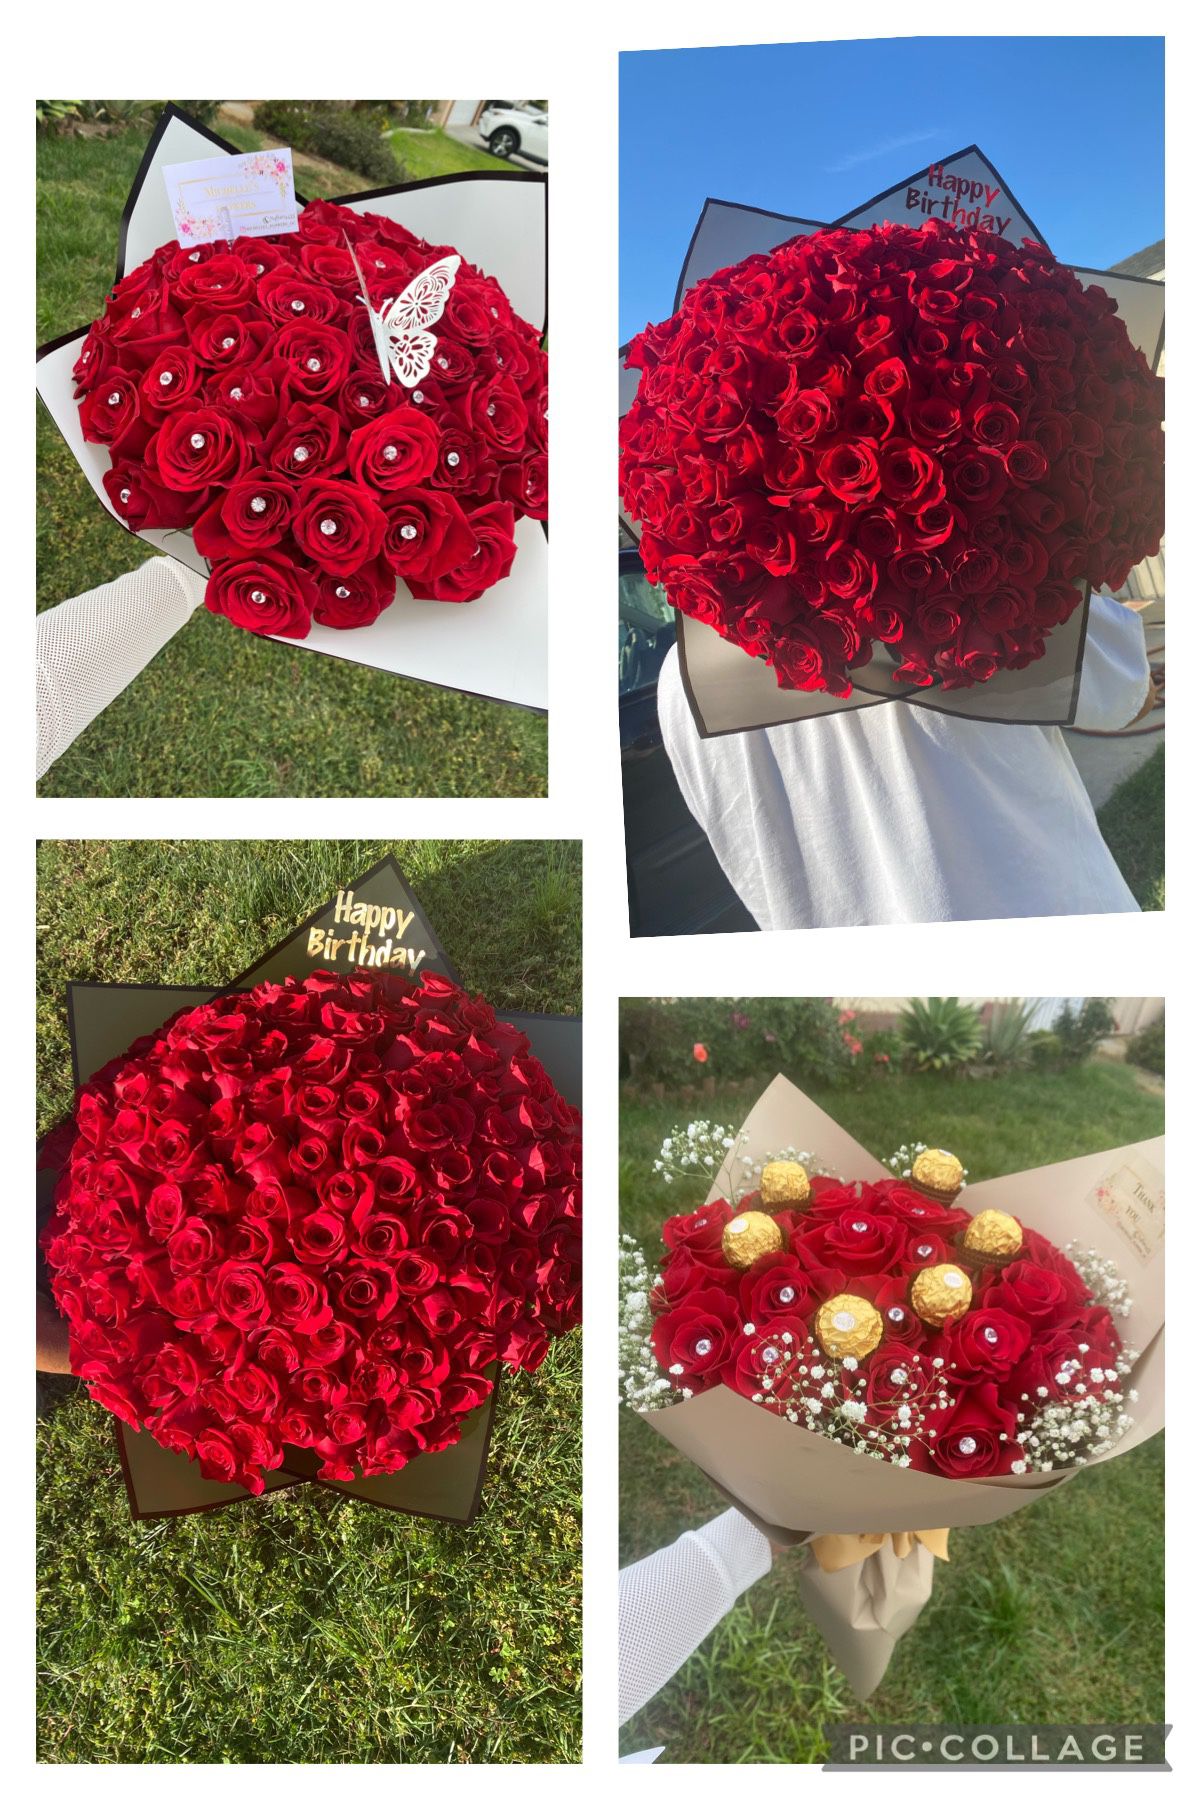 Roses Bouquets Flower arrangement For Any SpecialAny Special Occasion Birthday Anniversary Graduations Showers Wedding Parties Centerpieces 